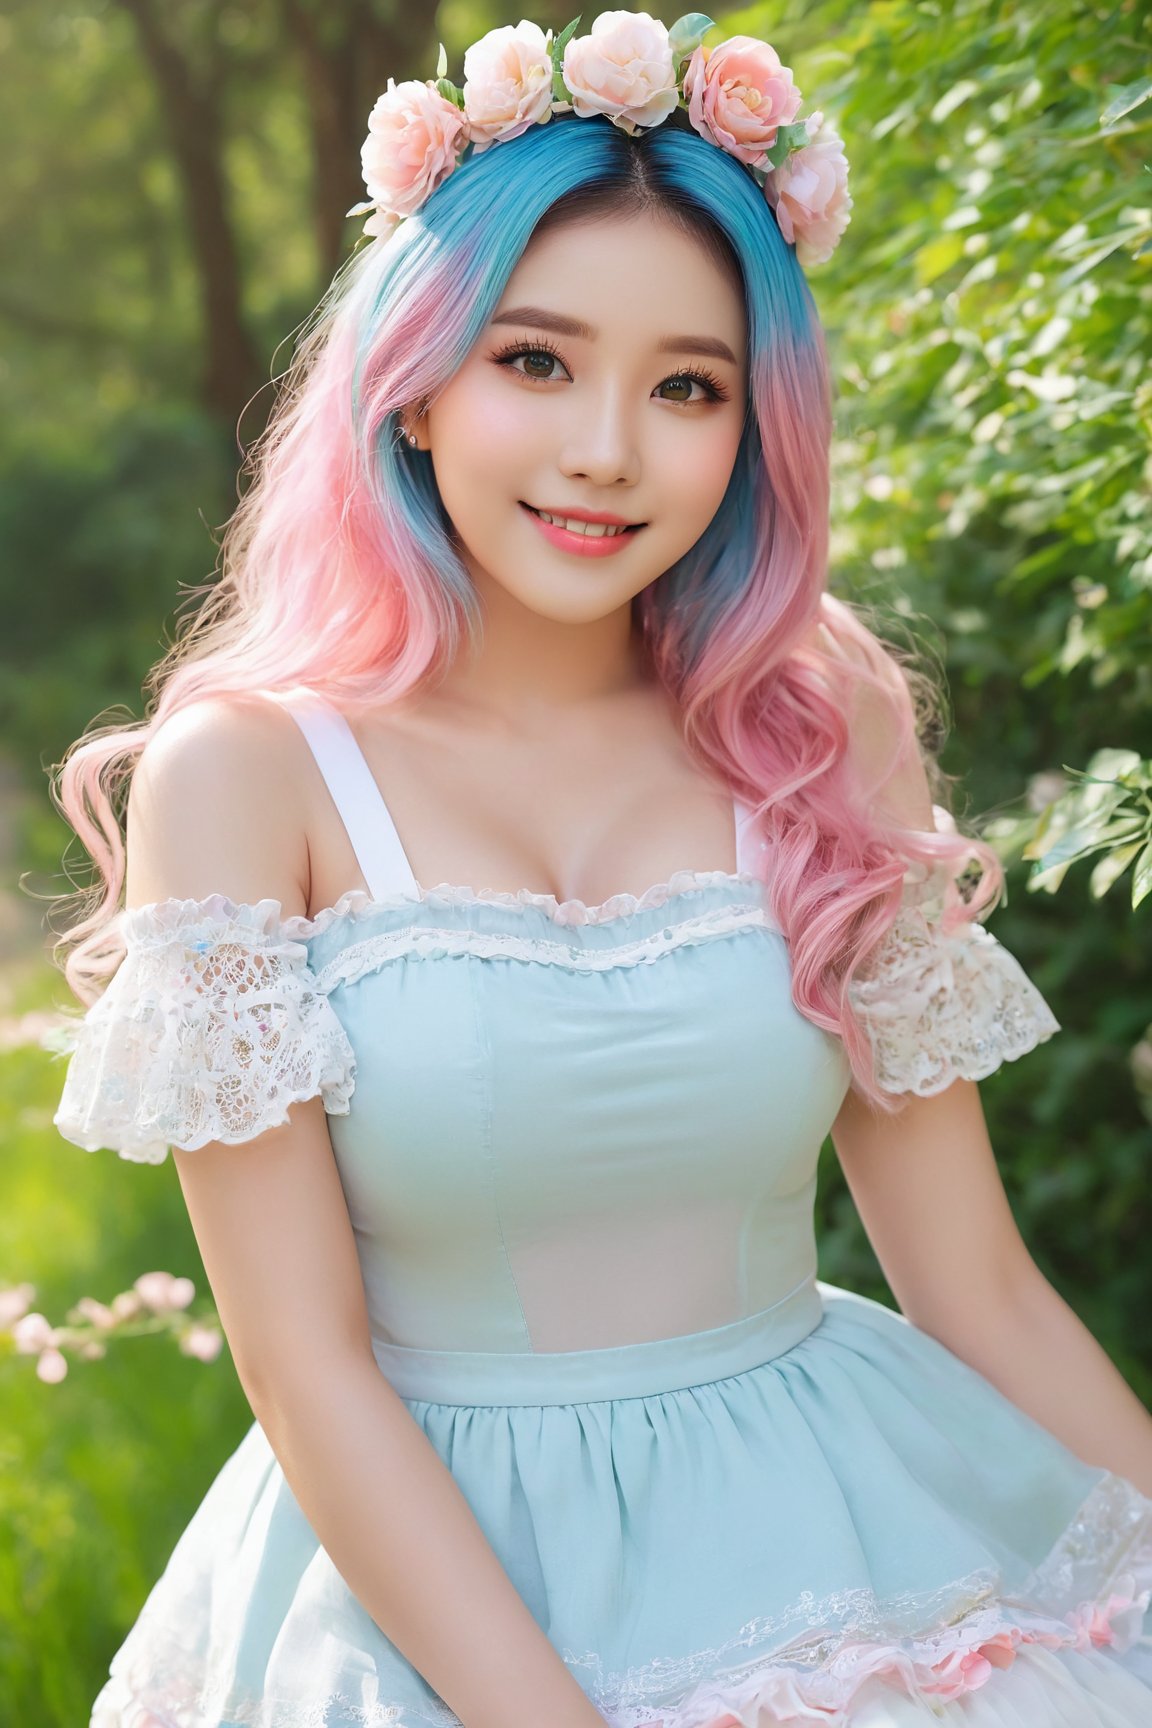 korean,girl,cute smile,huge breast,pink and blue hair,colorful hair,messy hair,green top,white skirt,beautiful detailed eyes,beautiful detailed lips,(best quality,4k,8k,highres,masterpiece:1.2),ultra-detailed,(realistic,photorealistic,photo-realistic:1.37),K-pop style,vivid colors,soft lighting,flower garden background,playful expression,flower crown,sparkling eyes,intricate lace details,ruffle sleeves,shimmering fabric,sunshine filtering through trees,pleasant breeze,fresh flowers,butterflies dancing around,delicate makeup,innocent charm,dynamic pose,captivating gaze,Candyland theme,magical atmosphere,subtle blush,joyful energy,ethereal beauty,soft pastel colors,whimsical surroundings,Sweet Lolita fashion,harmonious color palette,enchanted garden,airy and dreamy ambiance,cheerful and carefree vibe,fairytale-like scenario